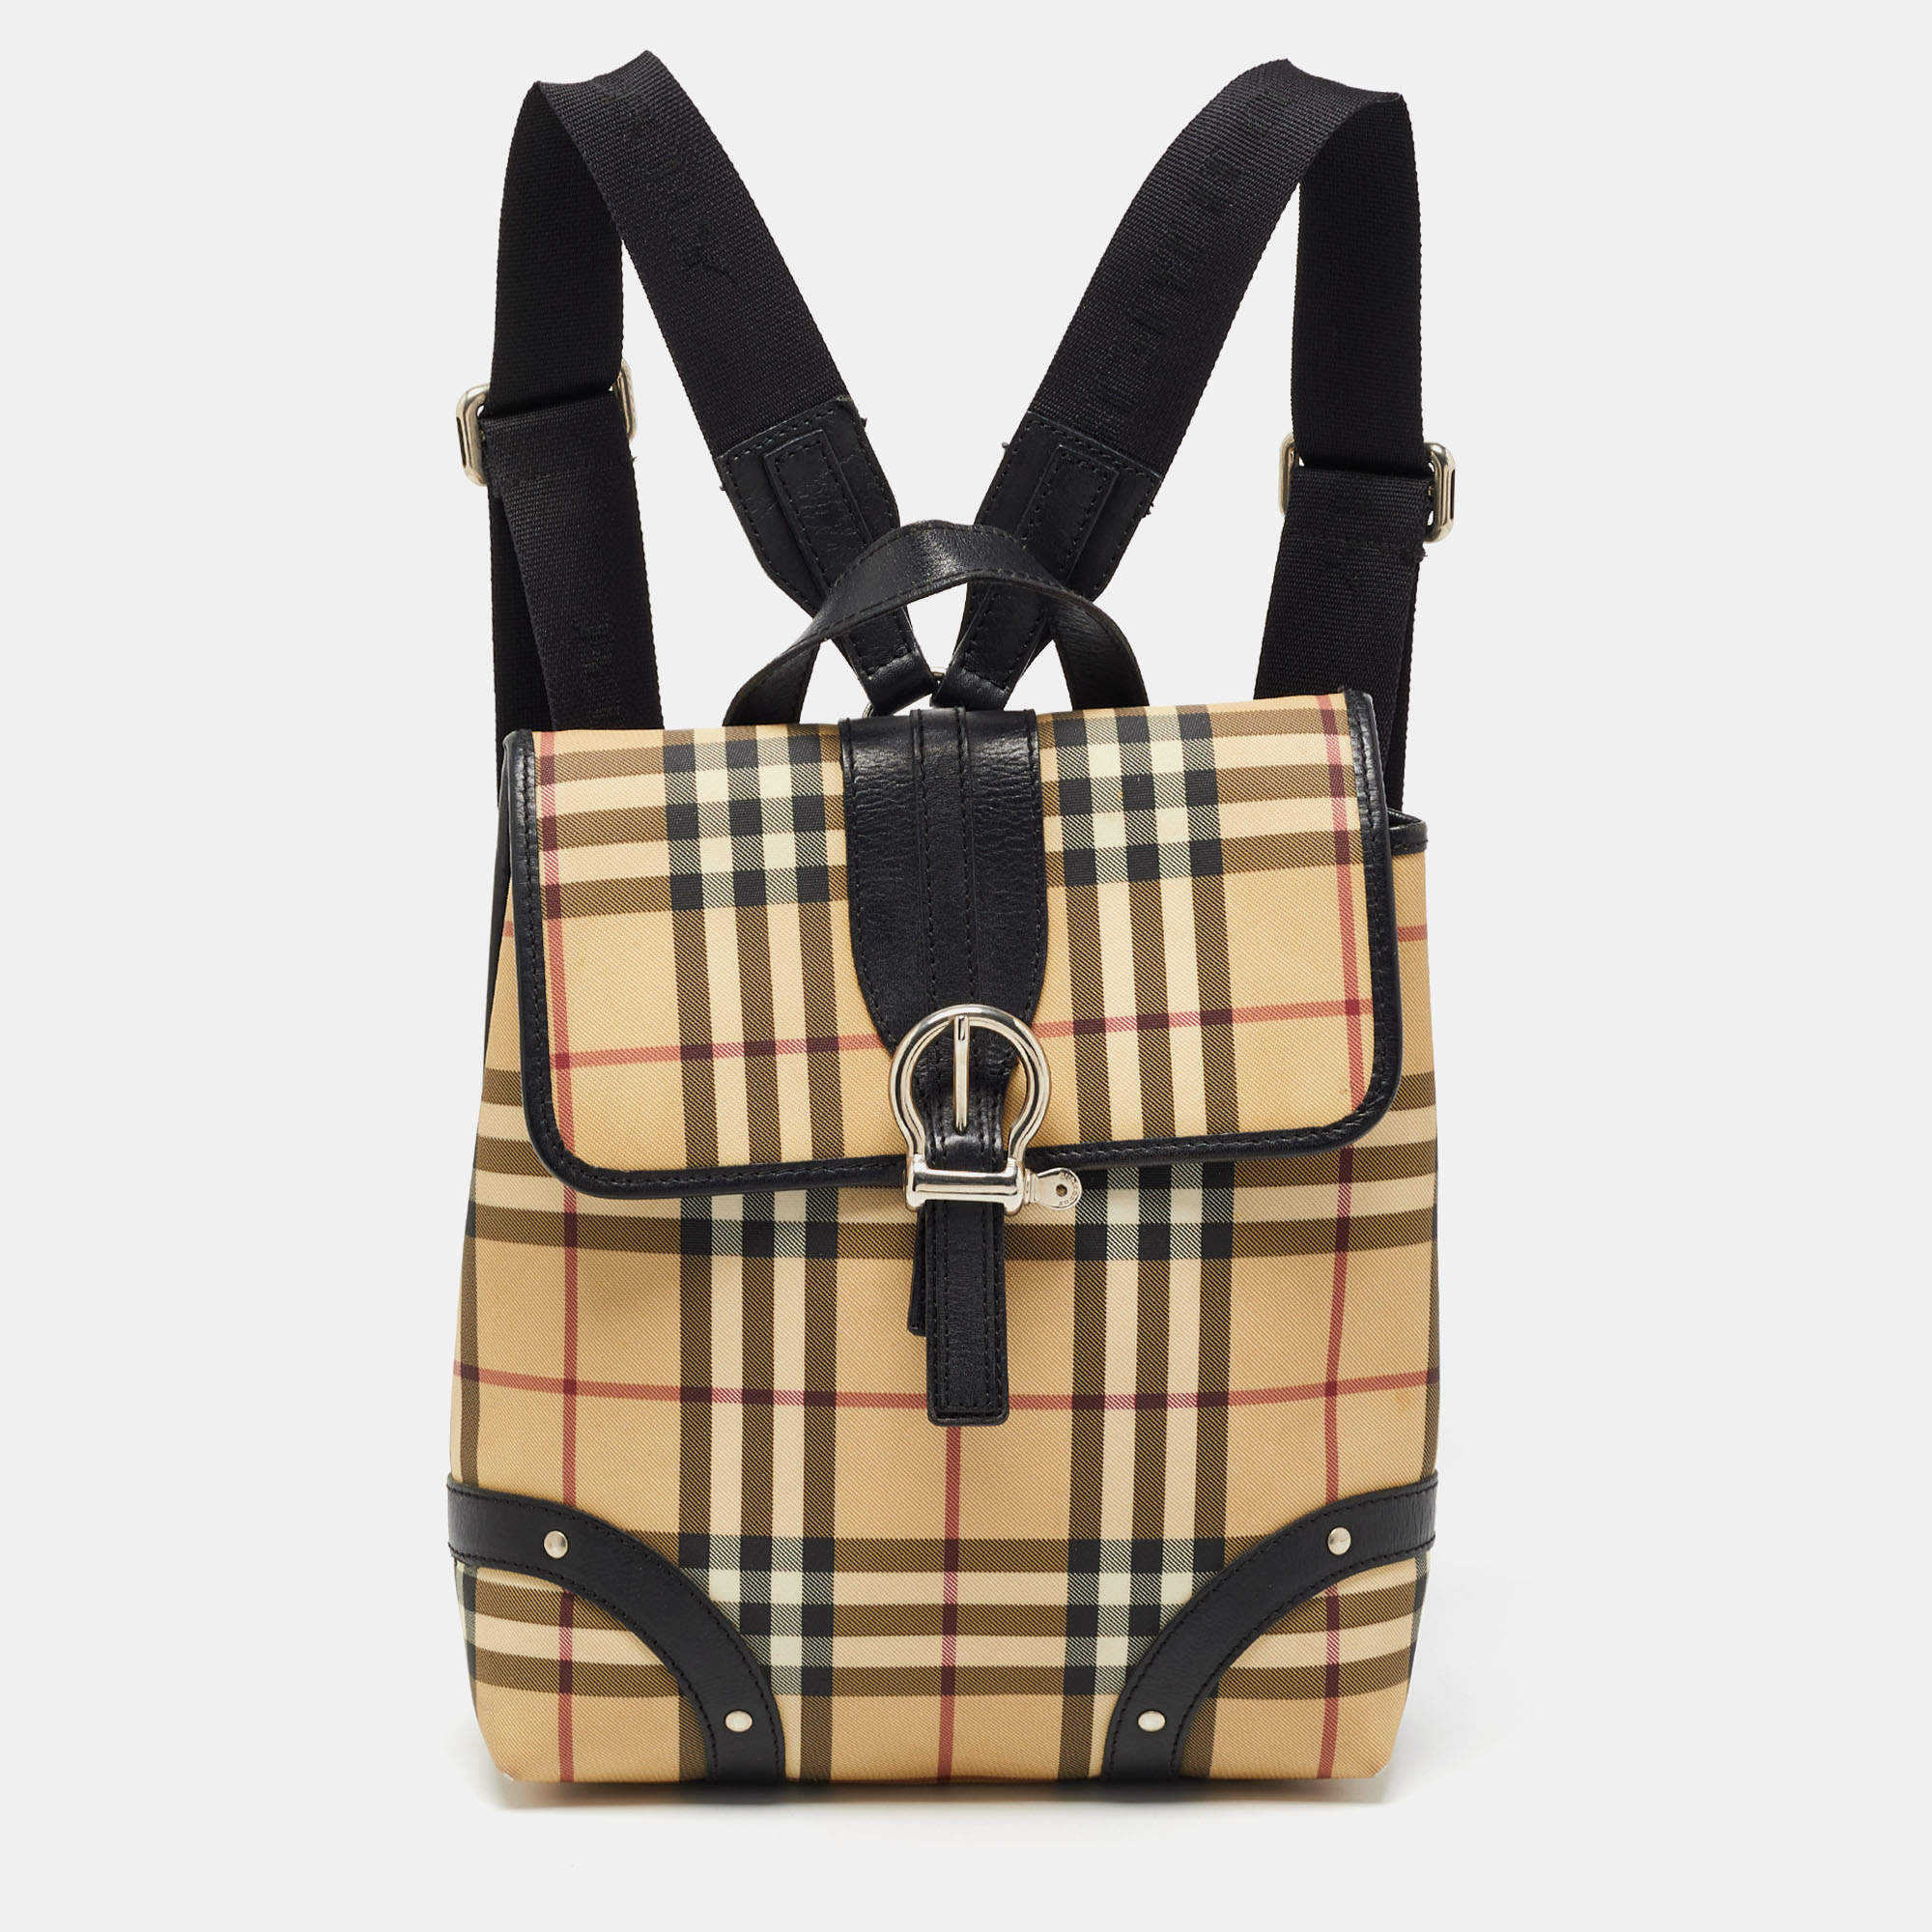 Burberry Black/Beige House Check PVC and Leather Monroe Shoulder Bag  Burberry | The Luxury Closet